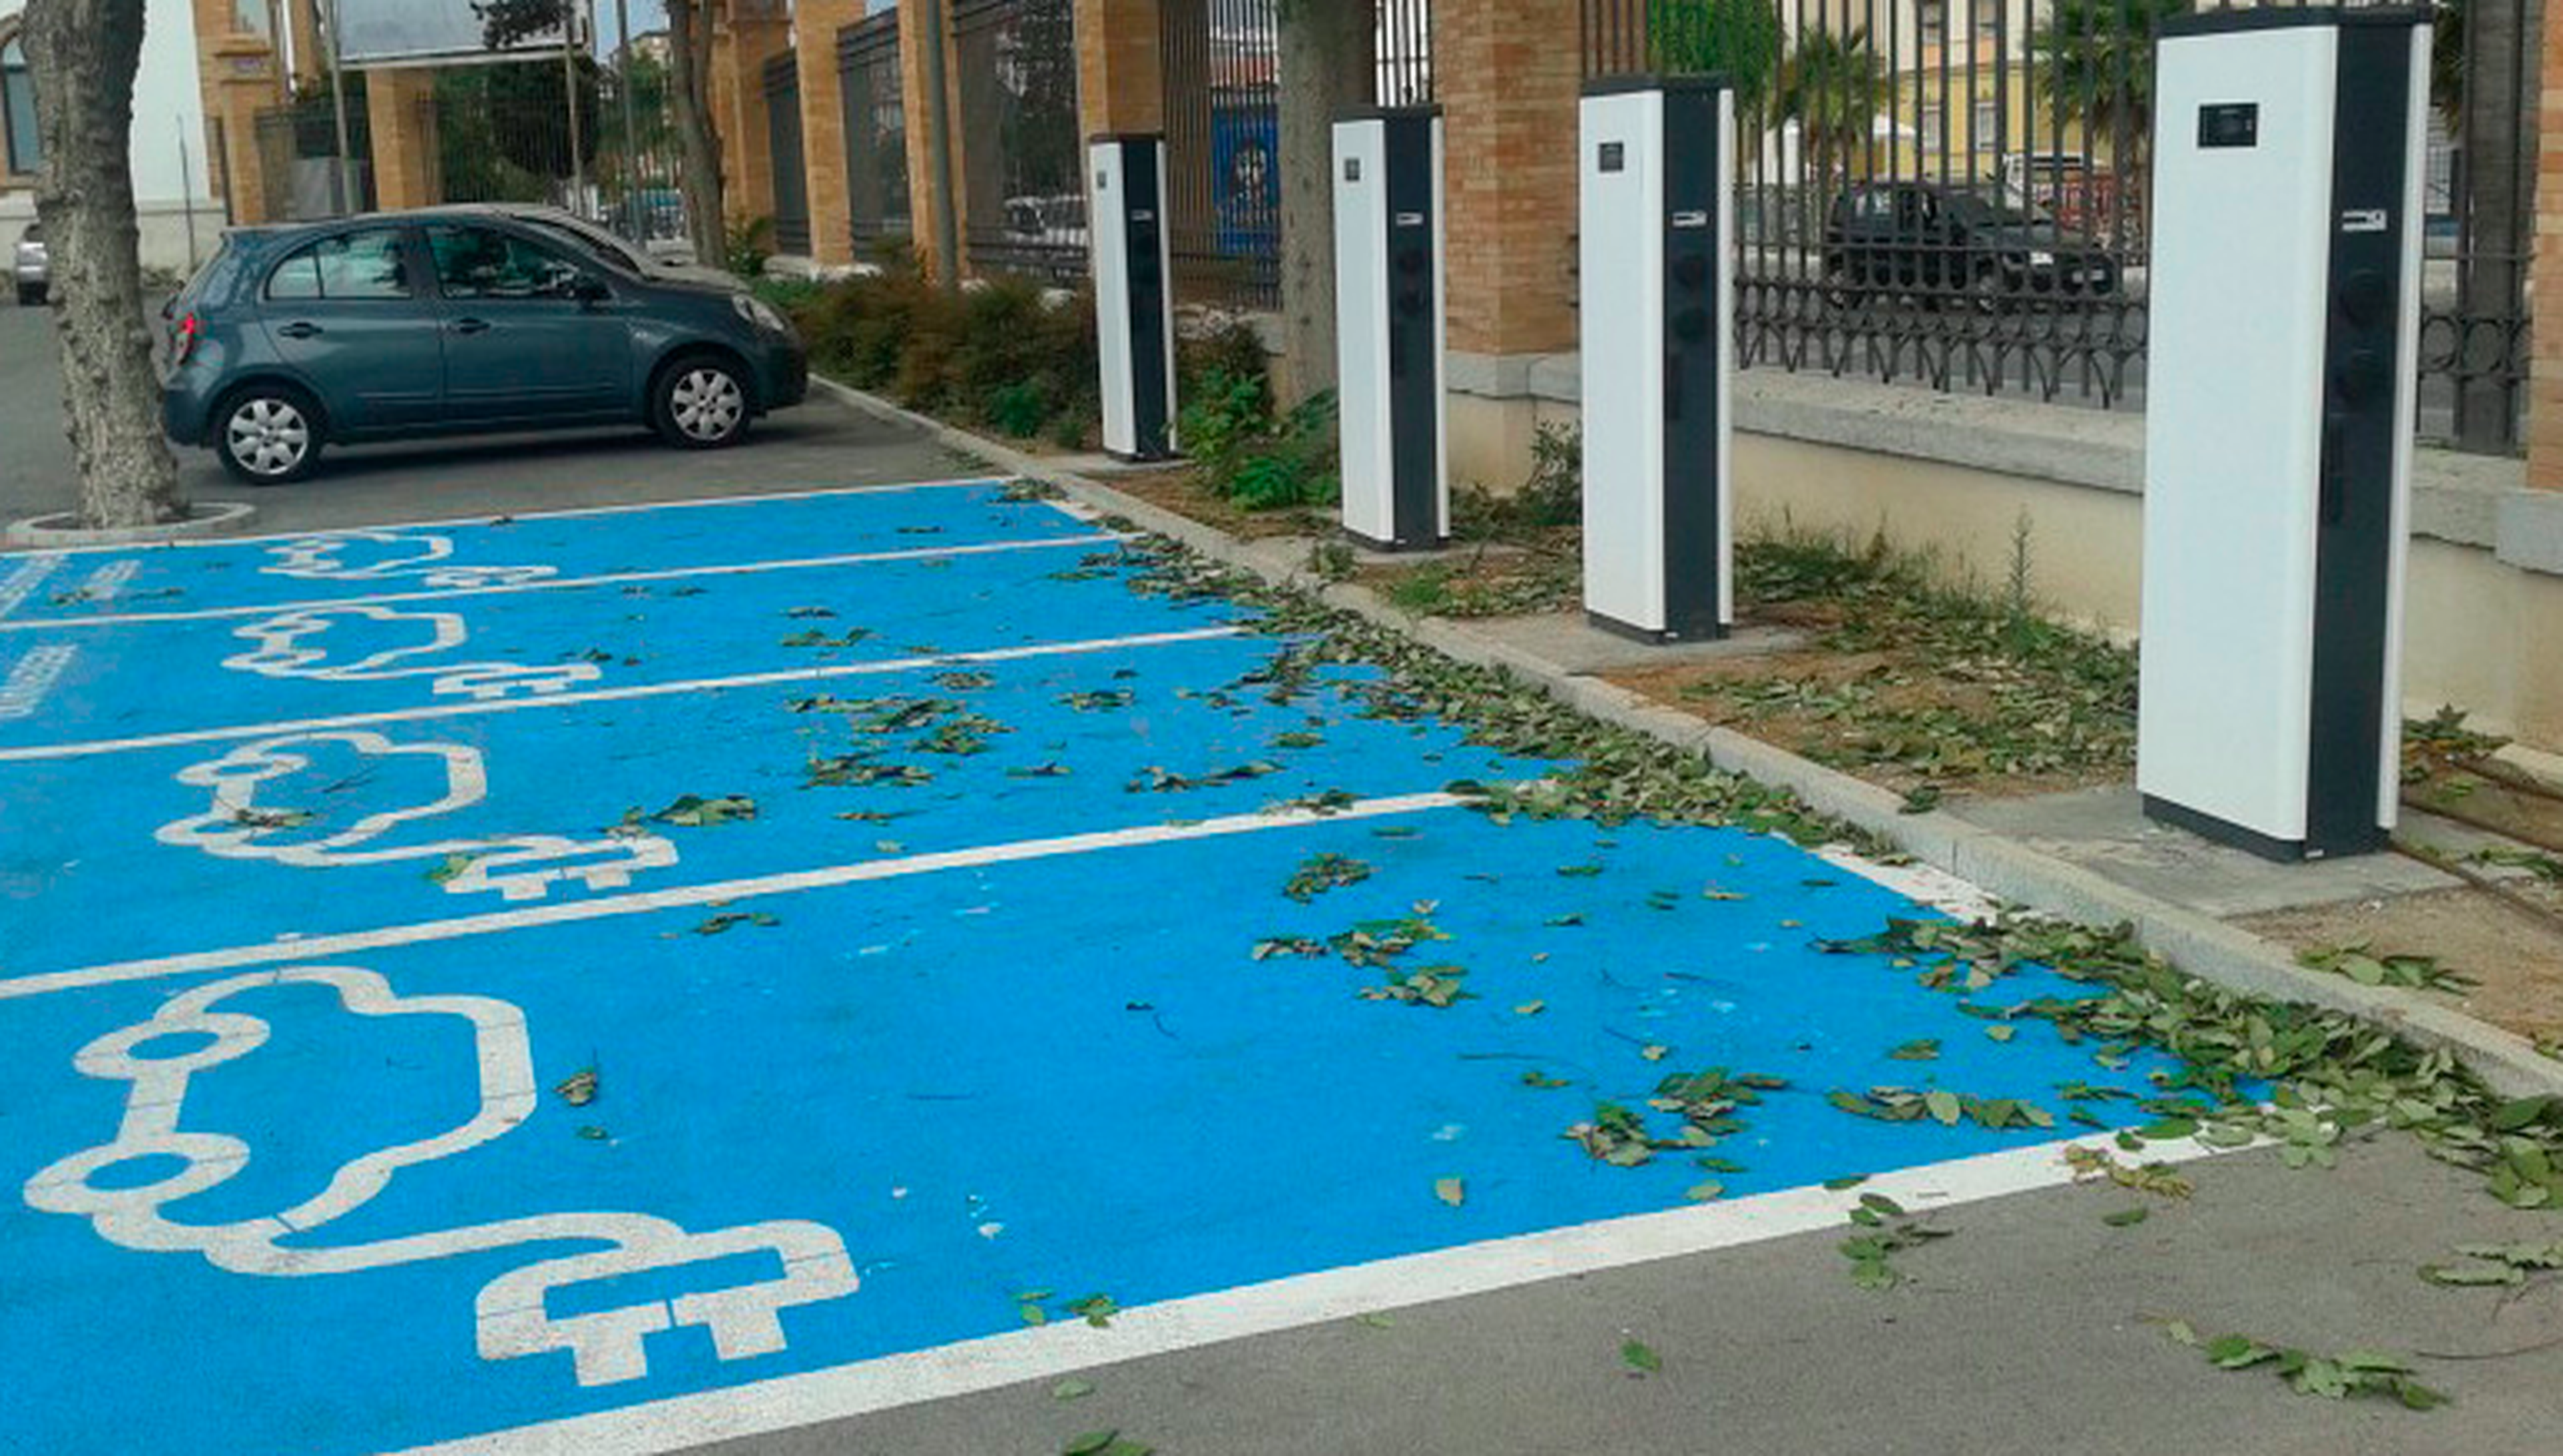 Parking for electric car on the street